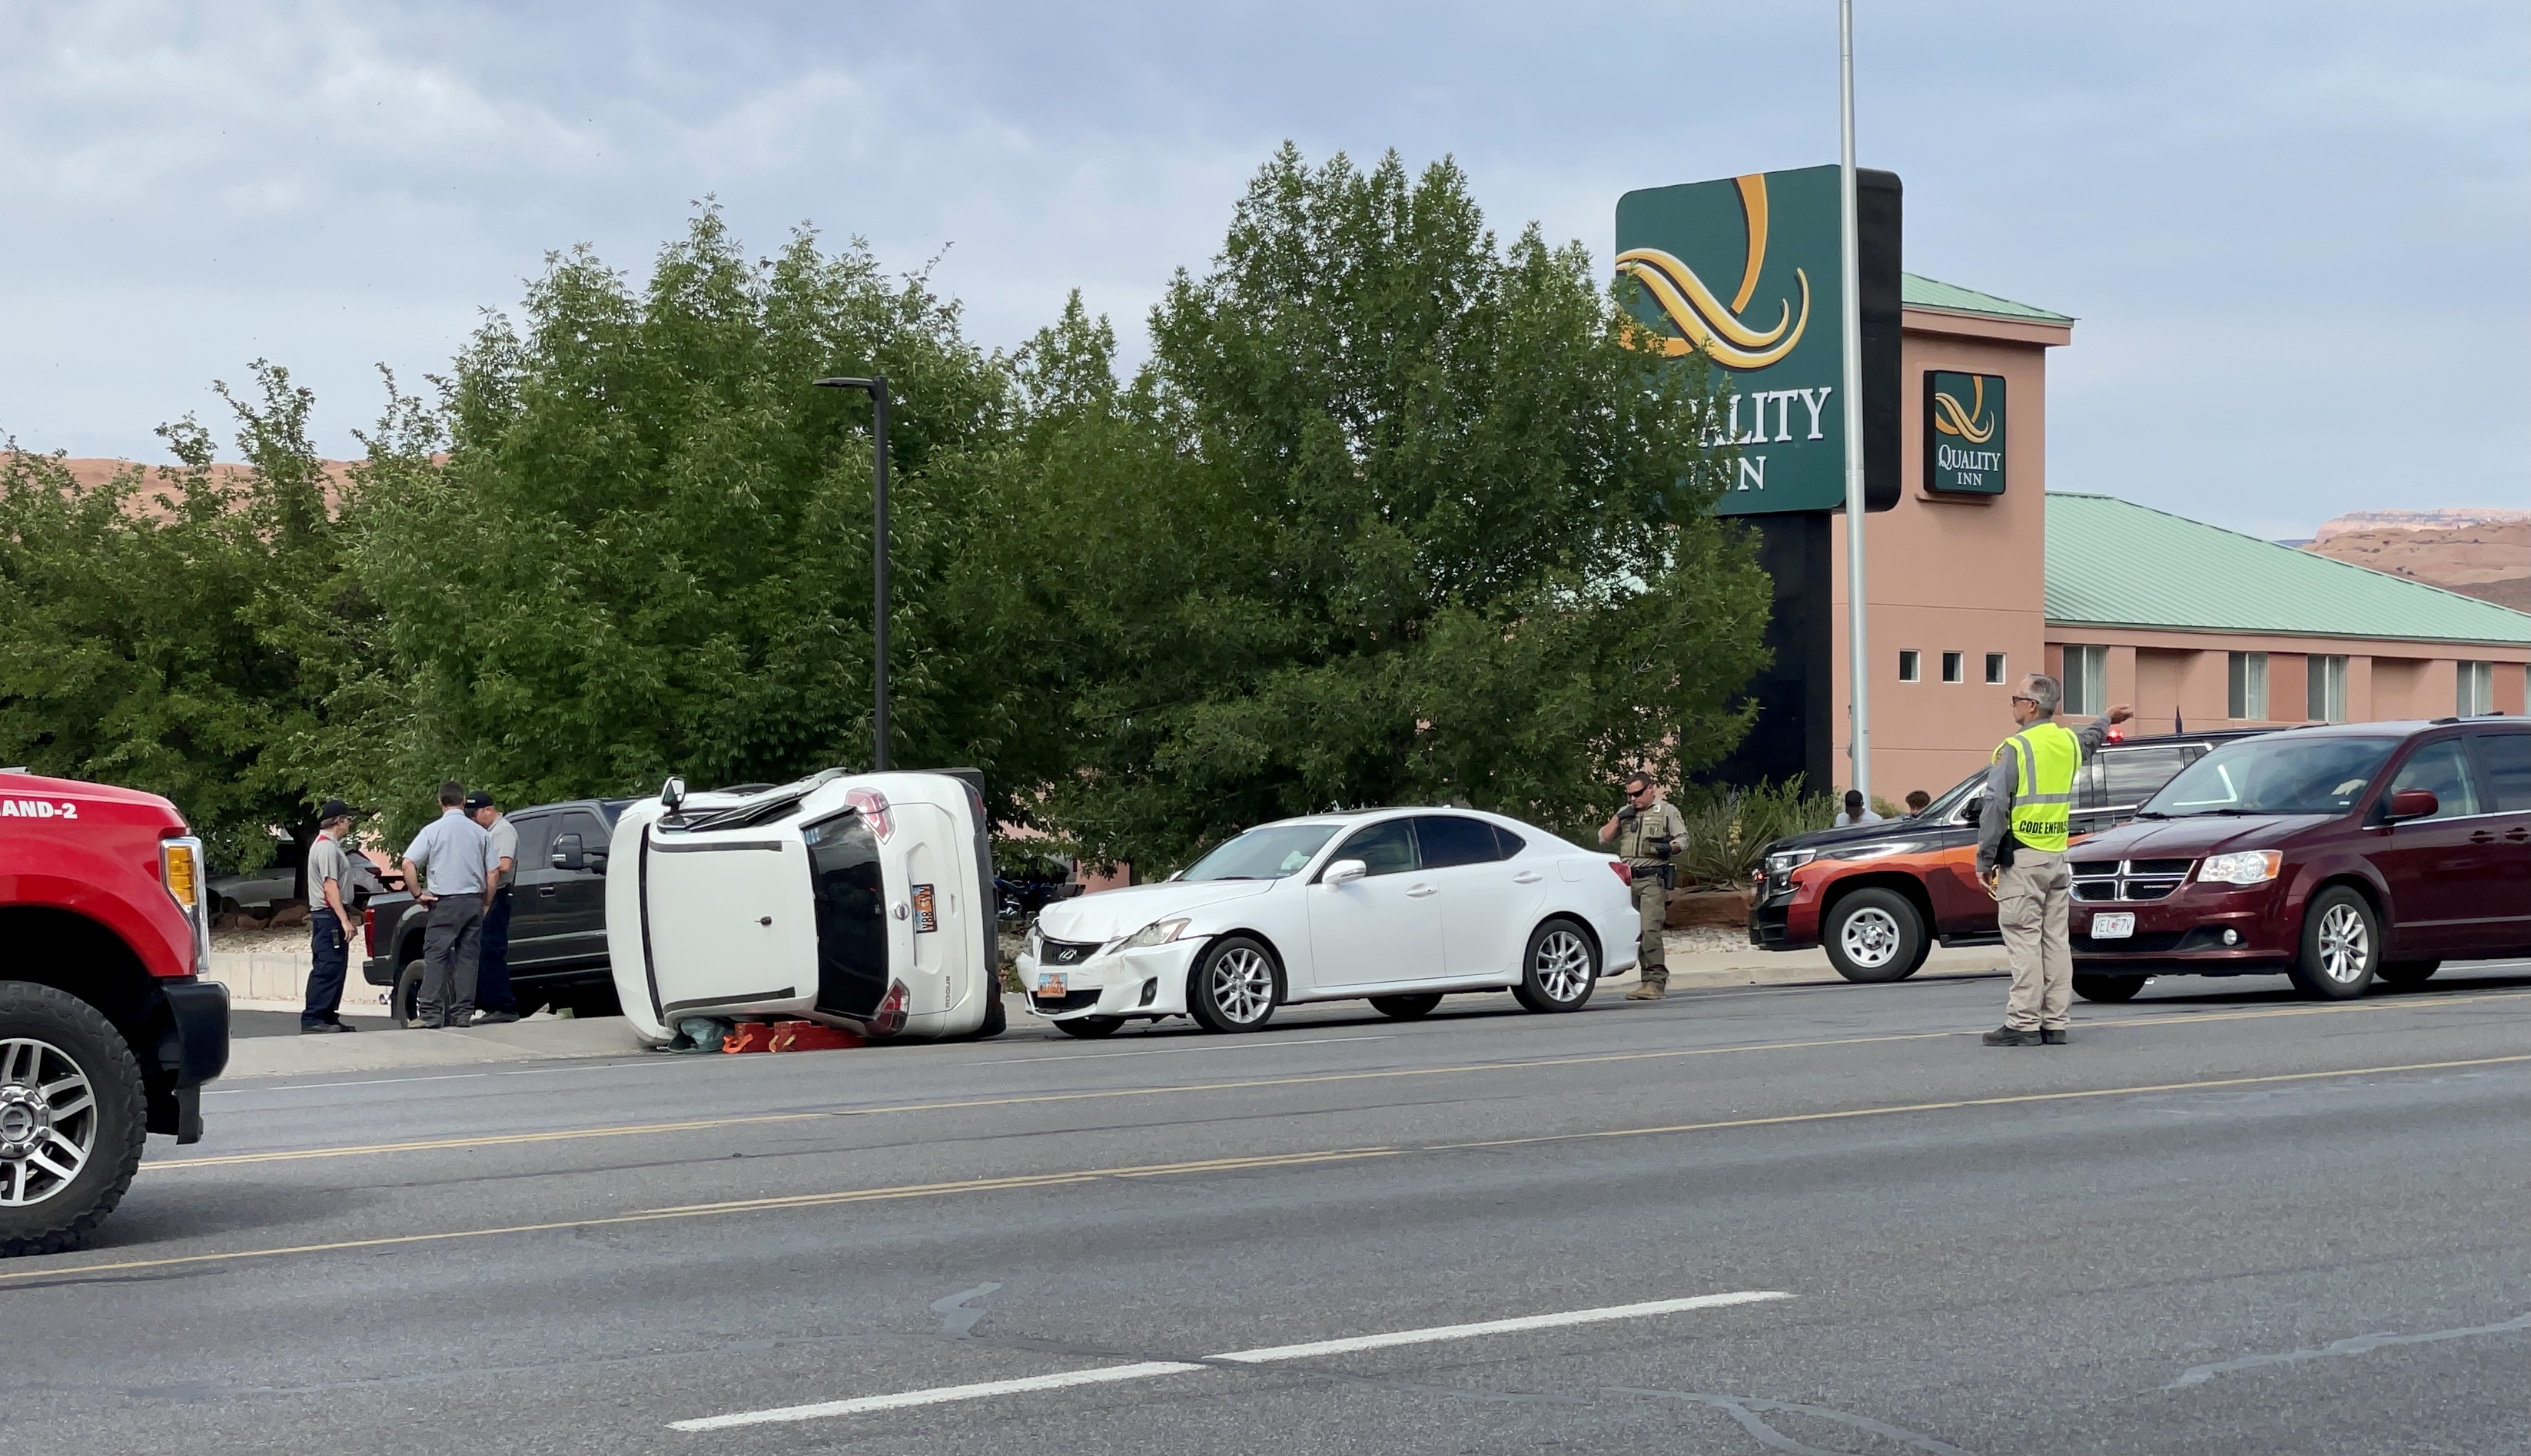 a car sits on its side in front of another vehicle with frontal damage